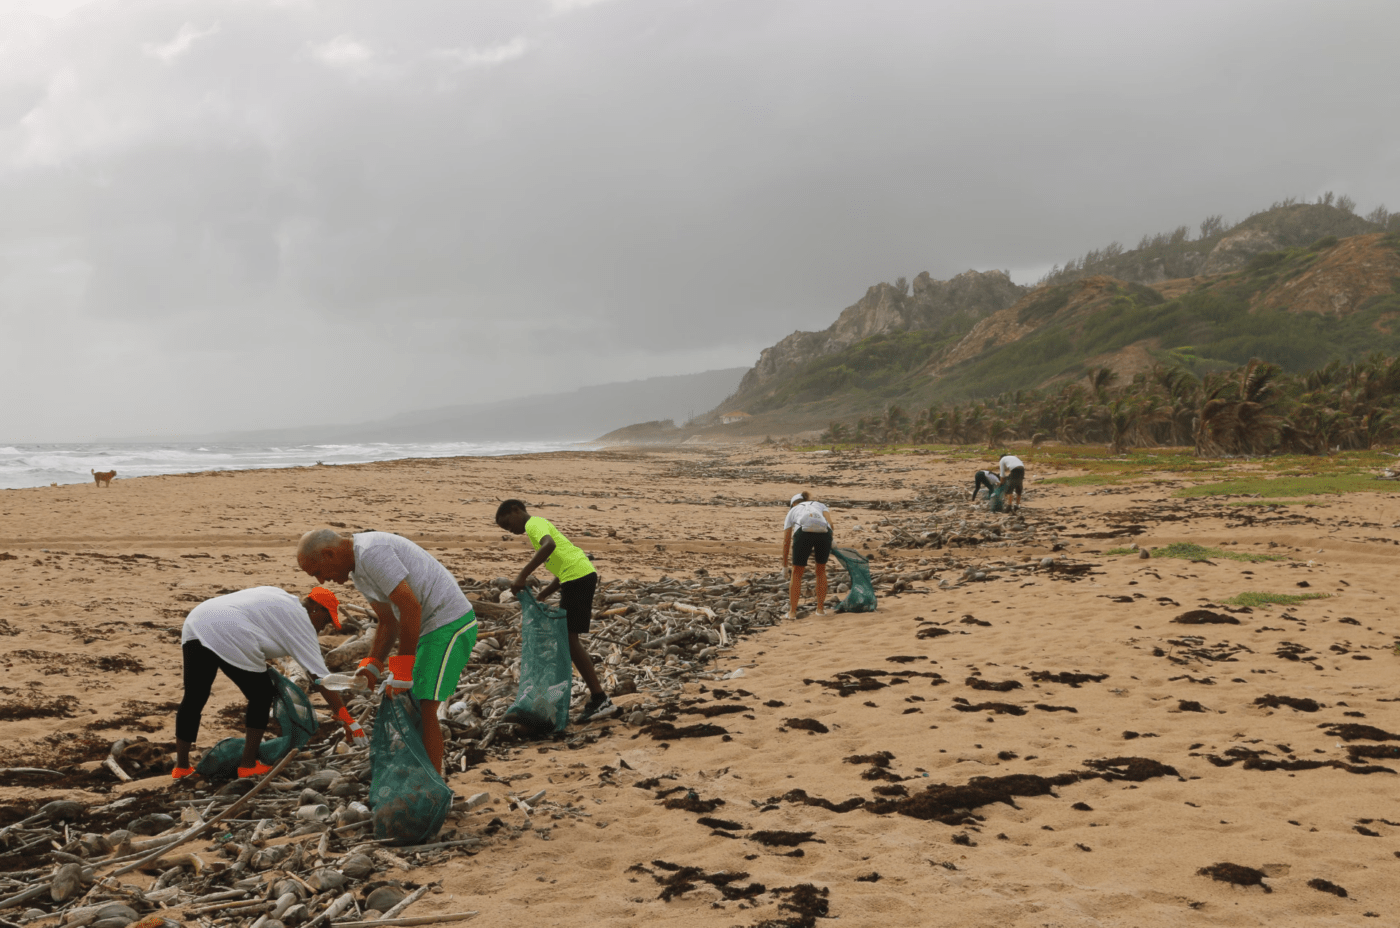 People cleaning trash on a beach